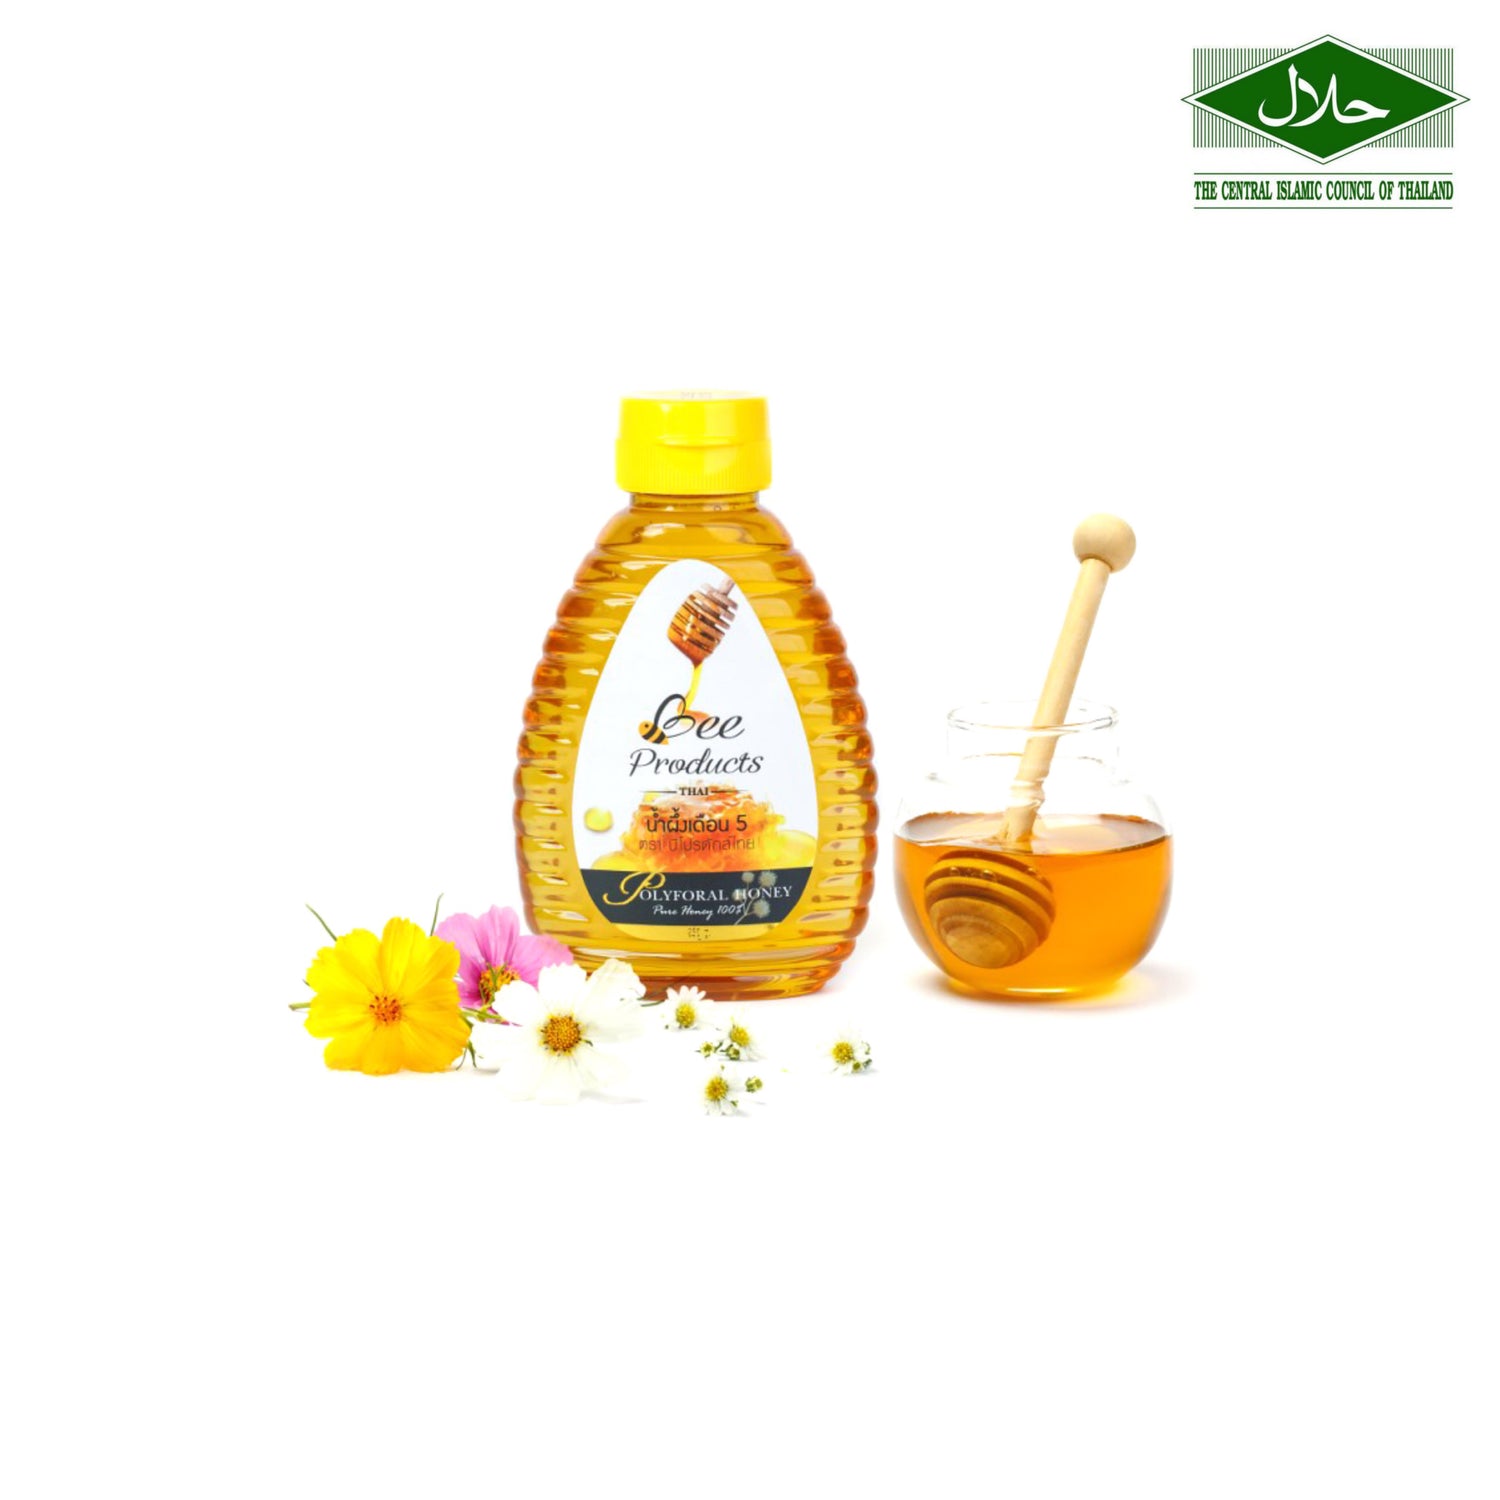 Bee Product Polyforal Honey 250g (Exp:10/10/2025)